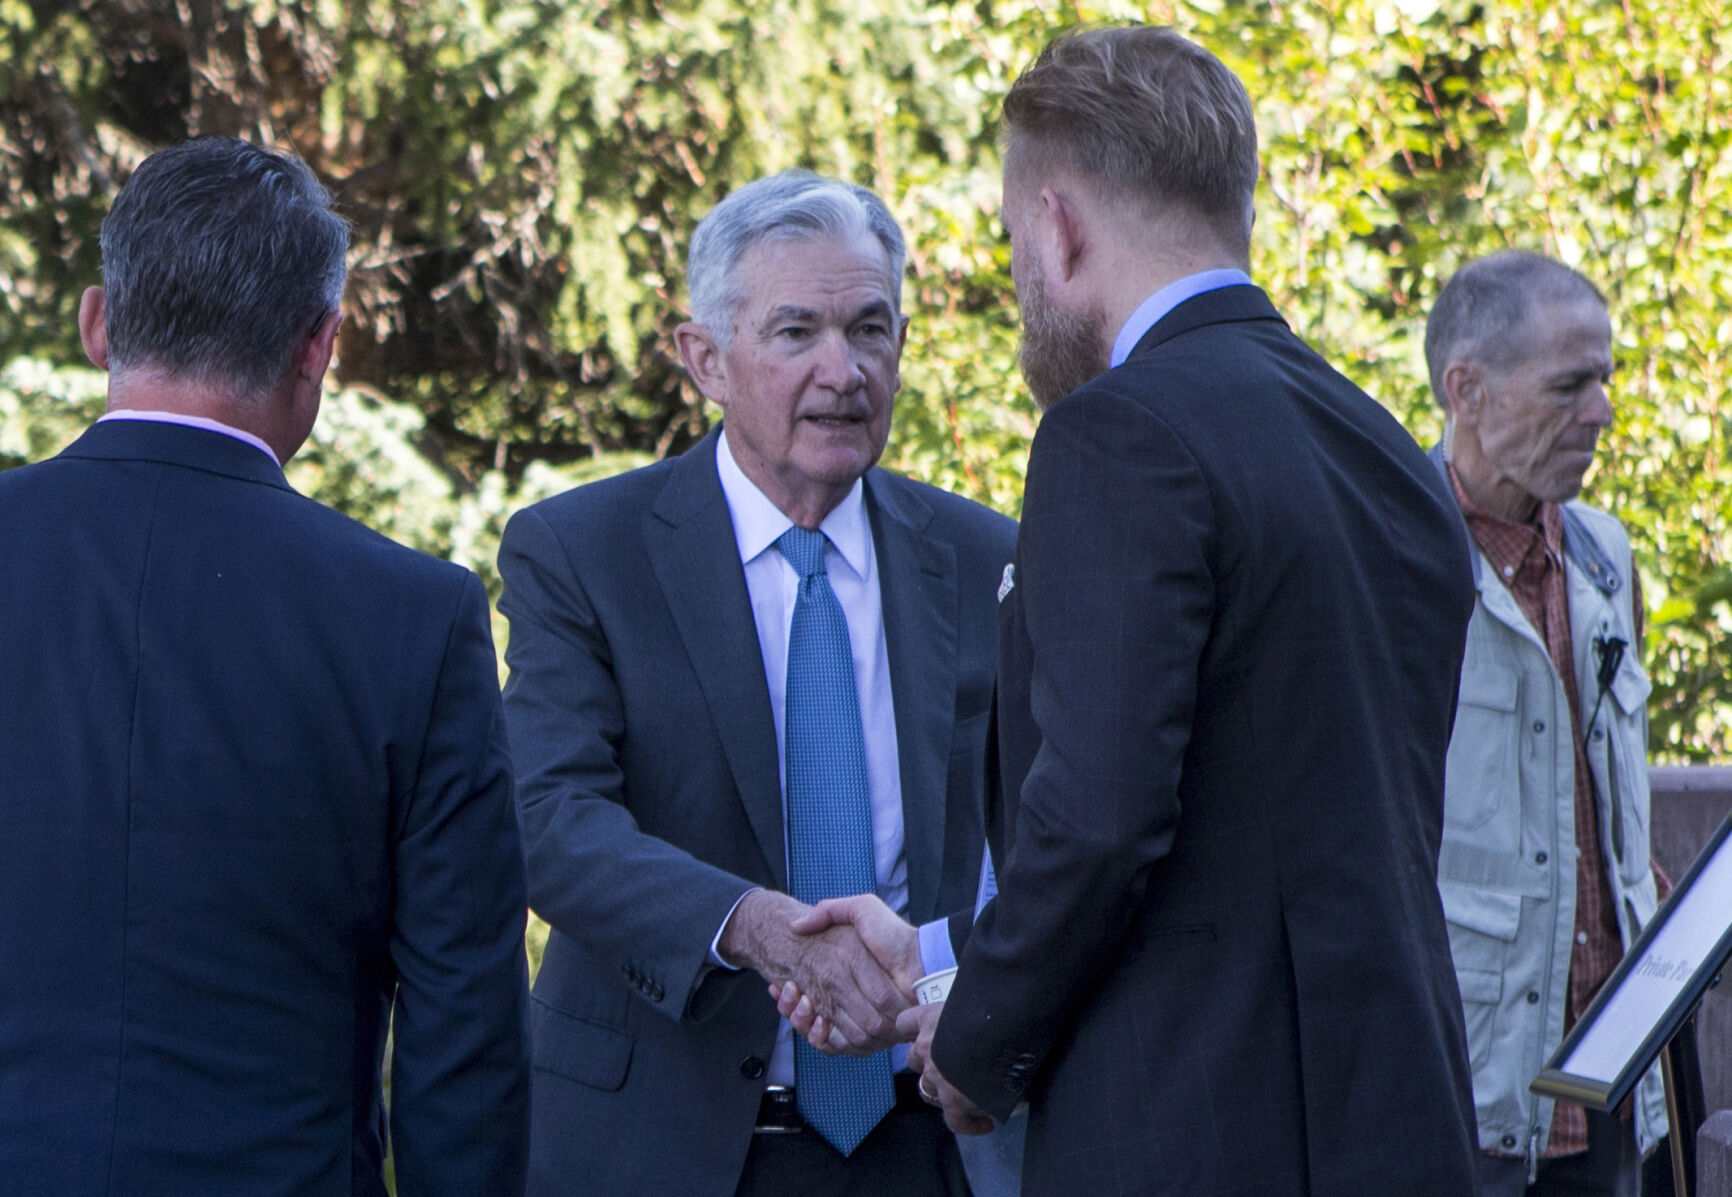 <p>File - Federal Reserve Chair Jerome Powell, center, shakes hands with Asgeir Jonsson, governor of the Central Bank of Iceland, at the annual Jackson Hole Economic Policy symposium in Grand Teton National Park in Moran, WY. on Aug. 26, 2022. When Powell delivers a high-profile speech Friday in Jackson Hole, many analysts think he could make one thing clear: That the Fed plans to keep its benchmark interest rate at a peak level for longer than had been expected. (AP Photo/Amber Baesler, File)</p>   PHOTO CREDIT: Amber Baesler - freelancer, ASSOCIATED PRESS